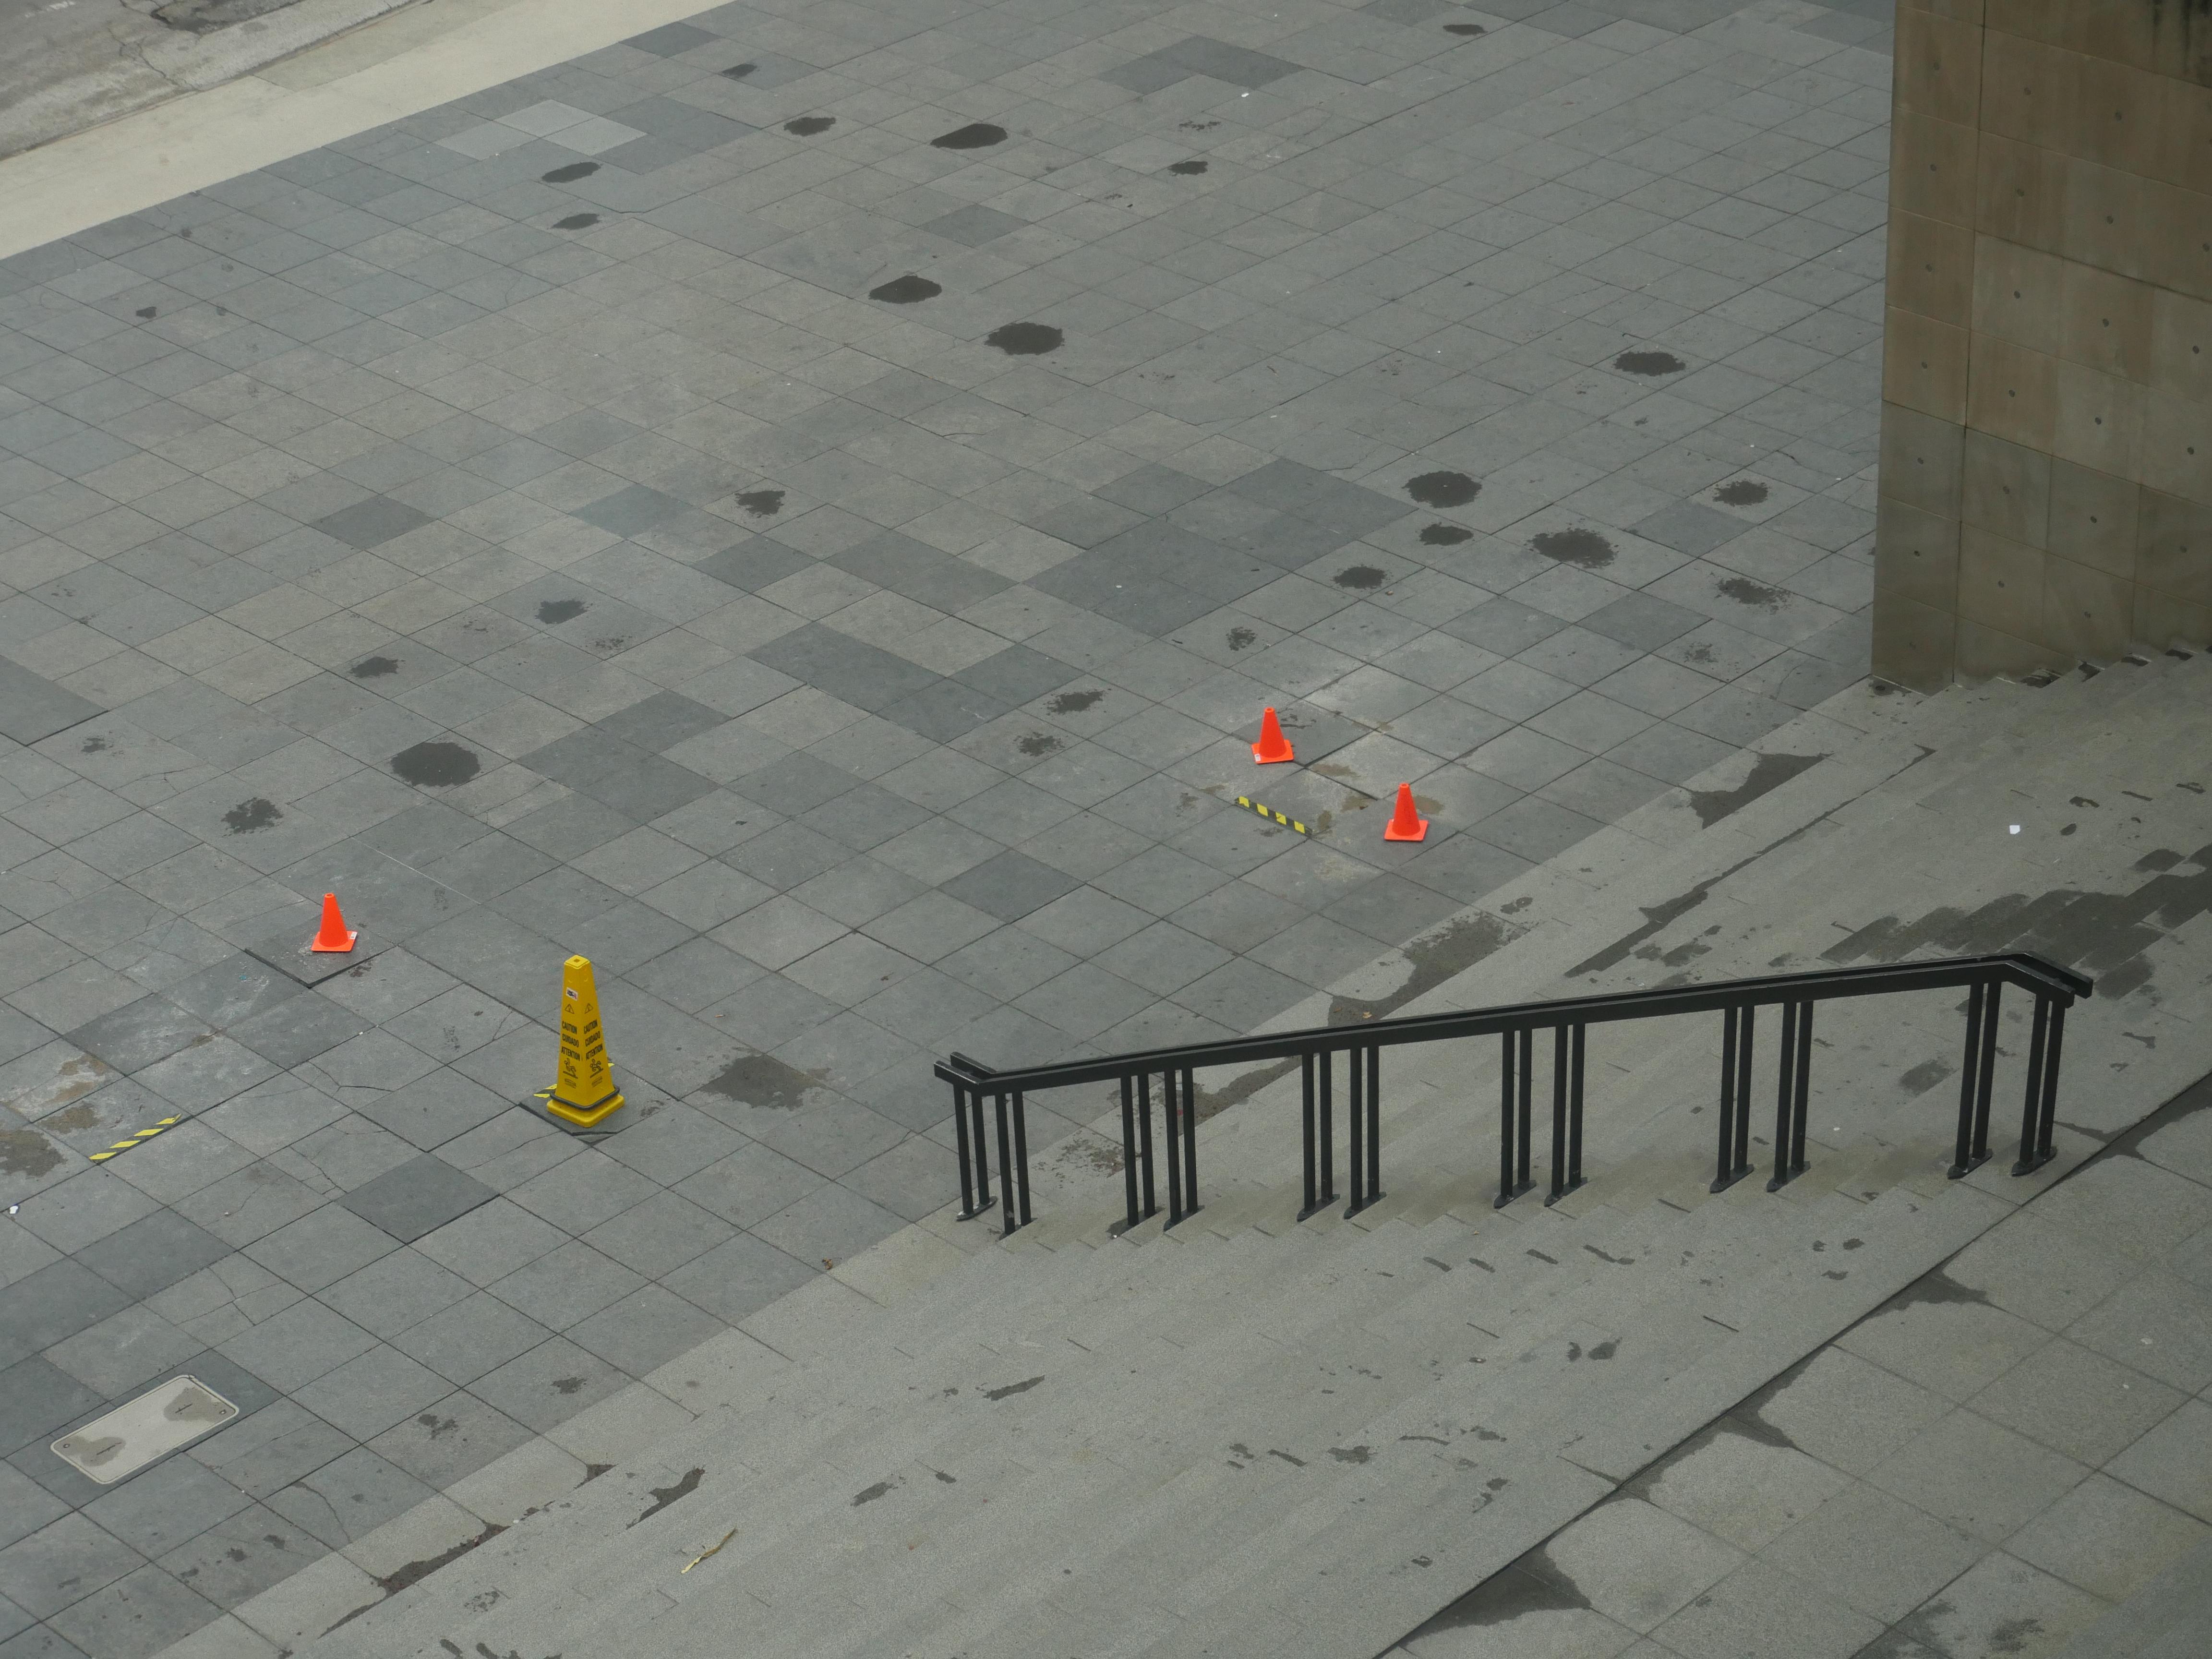 A stairway is shown from above, looking down on the plaza below where bright hazard cones dot the gray pavement tiles.